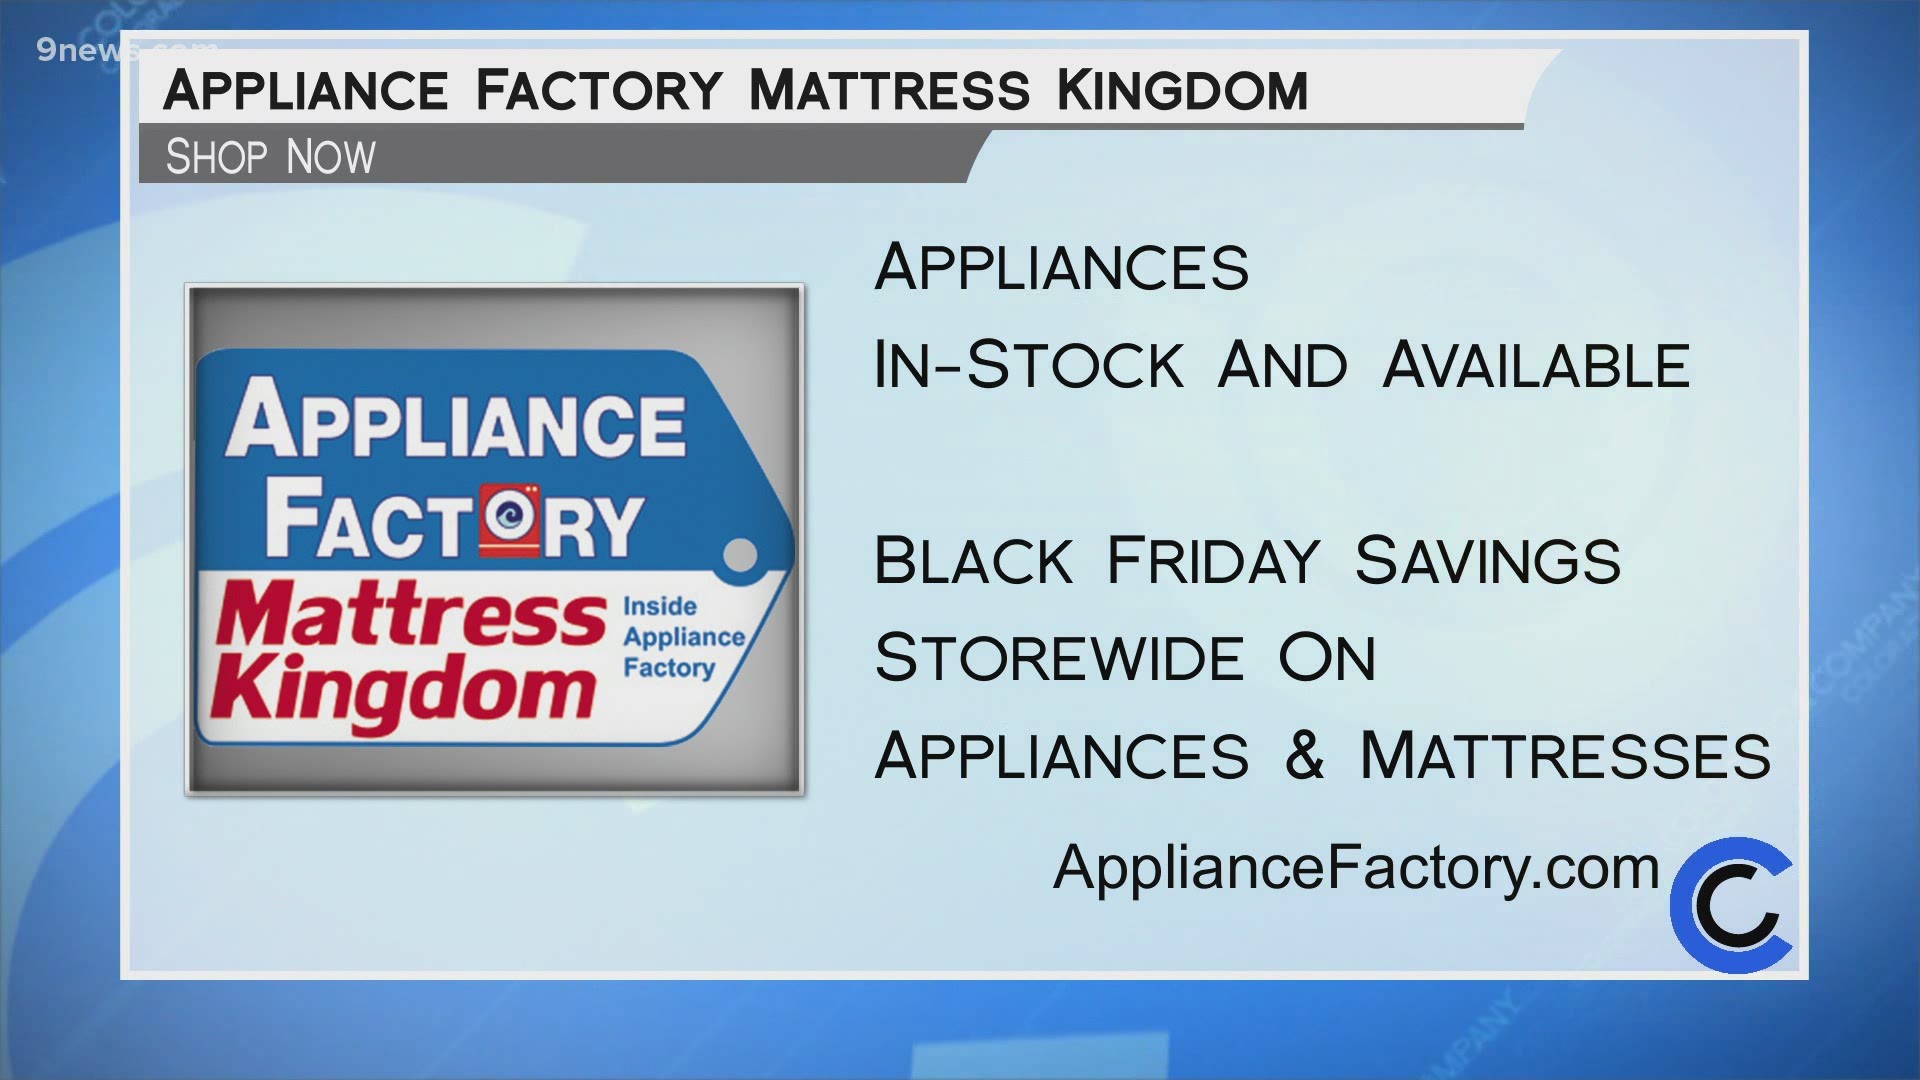 Find all of the Black Friday savings at ApplianceFactory.com.